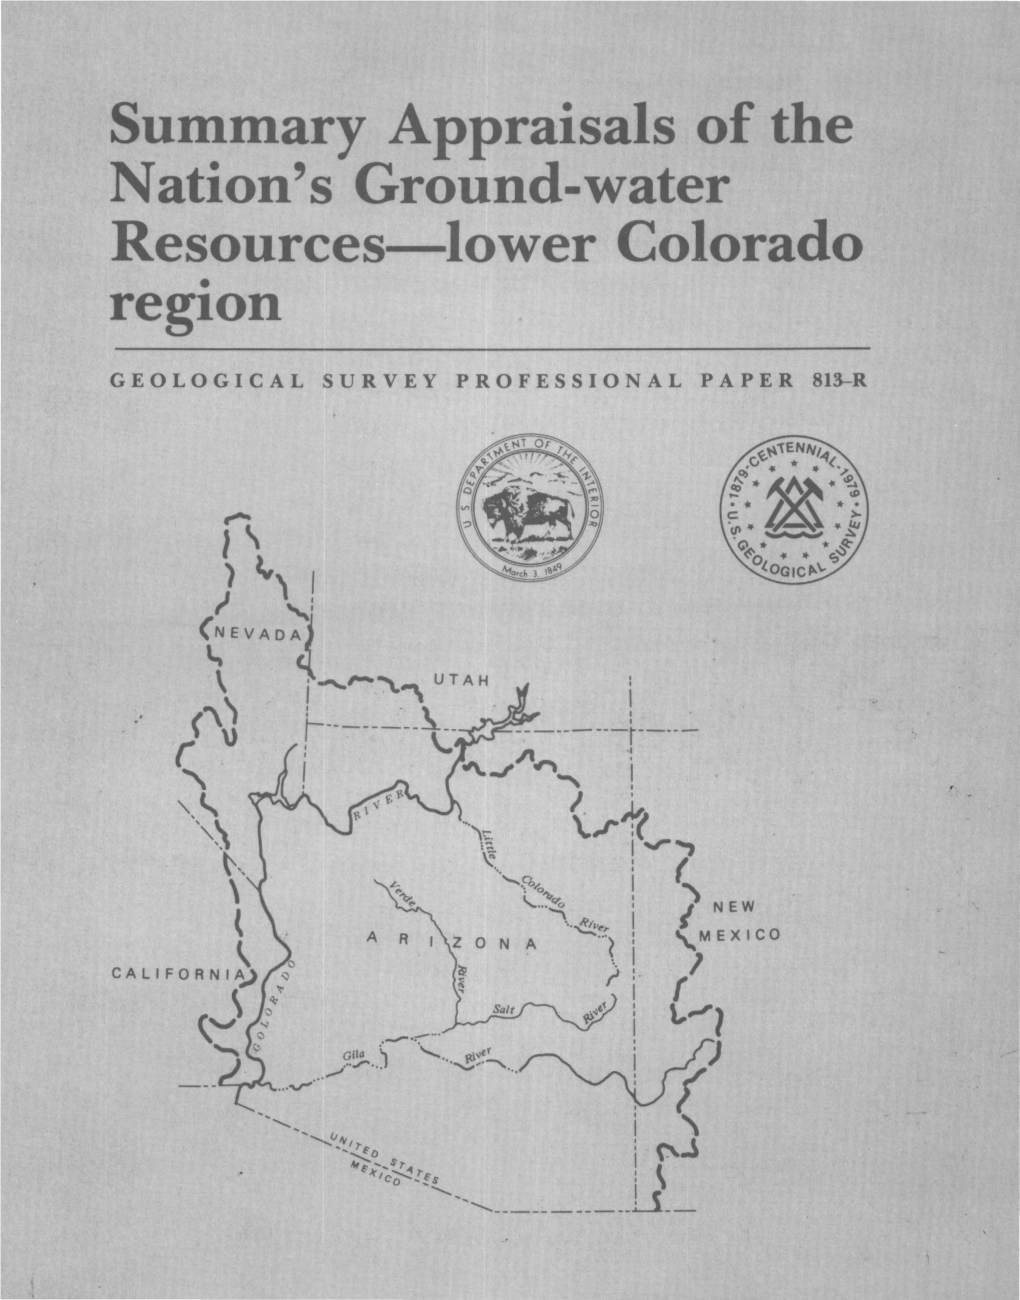 LOWER COLORADO REGION Water Resources Regions M Letters Indicate Chapter Designations Chapters Are Published Or in Press in U.S.G.S